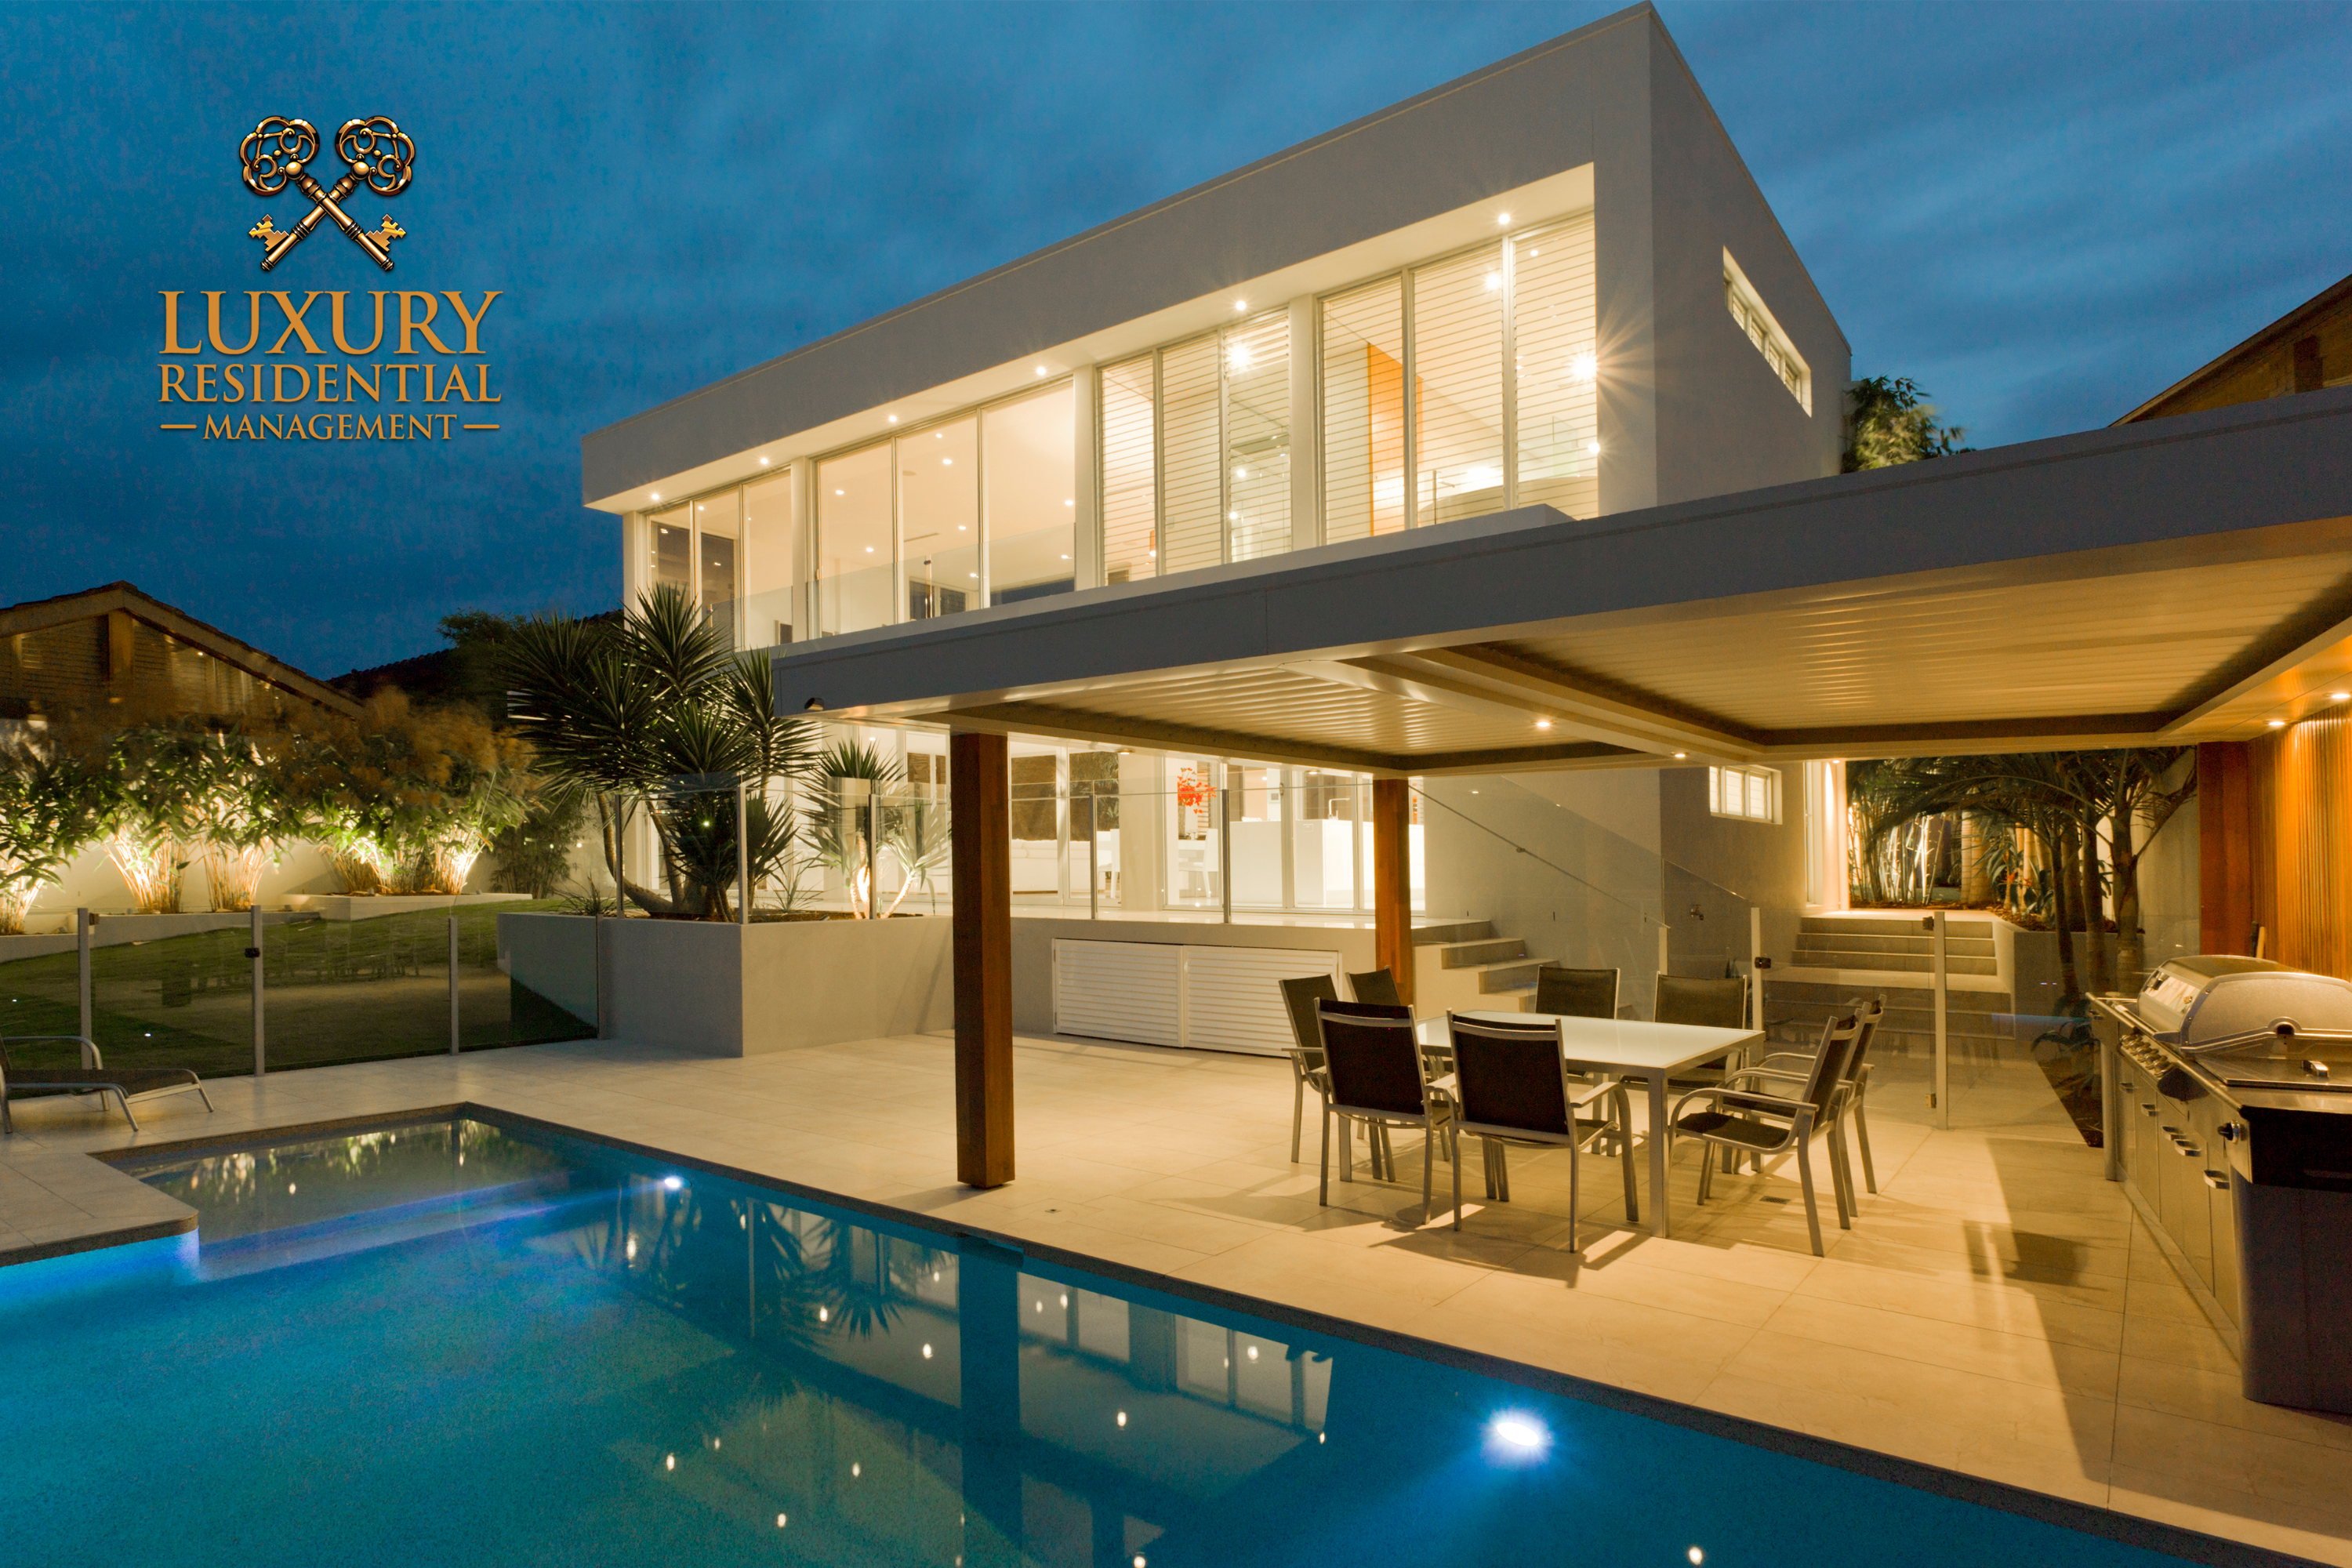 Why your residence needs Luxury Residential Management